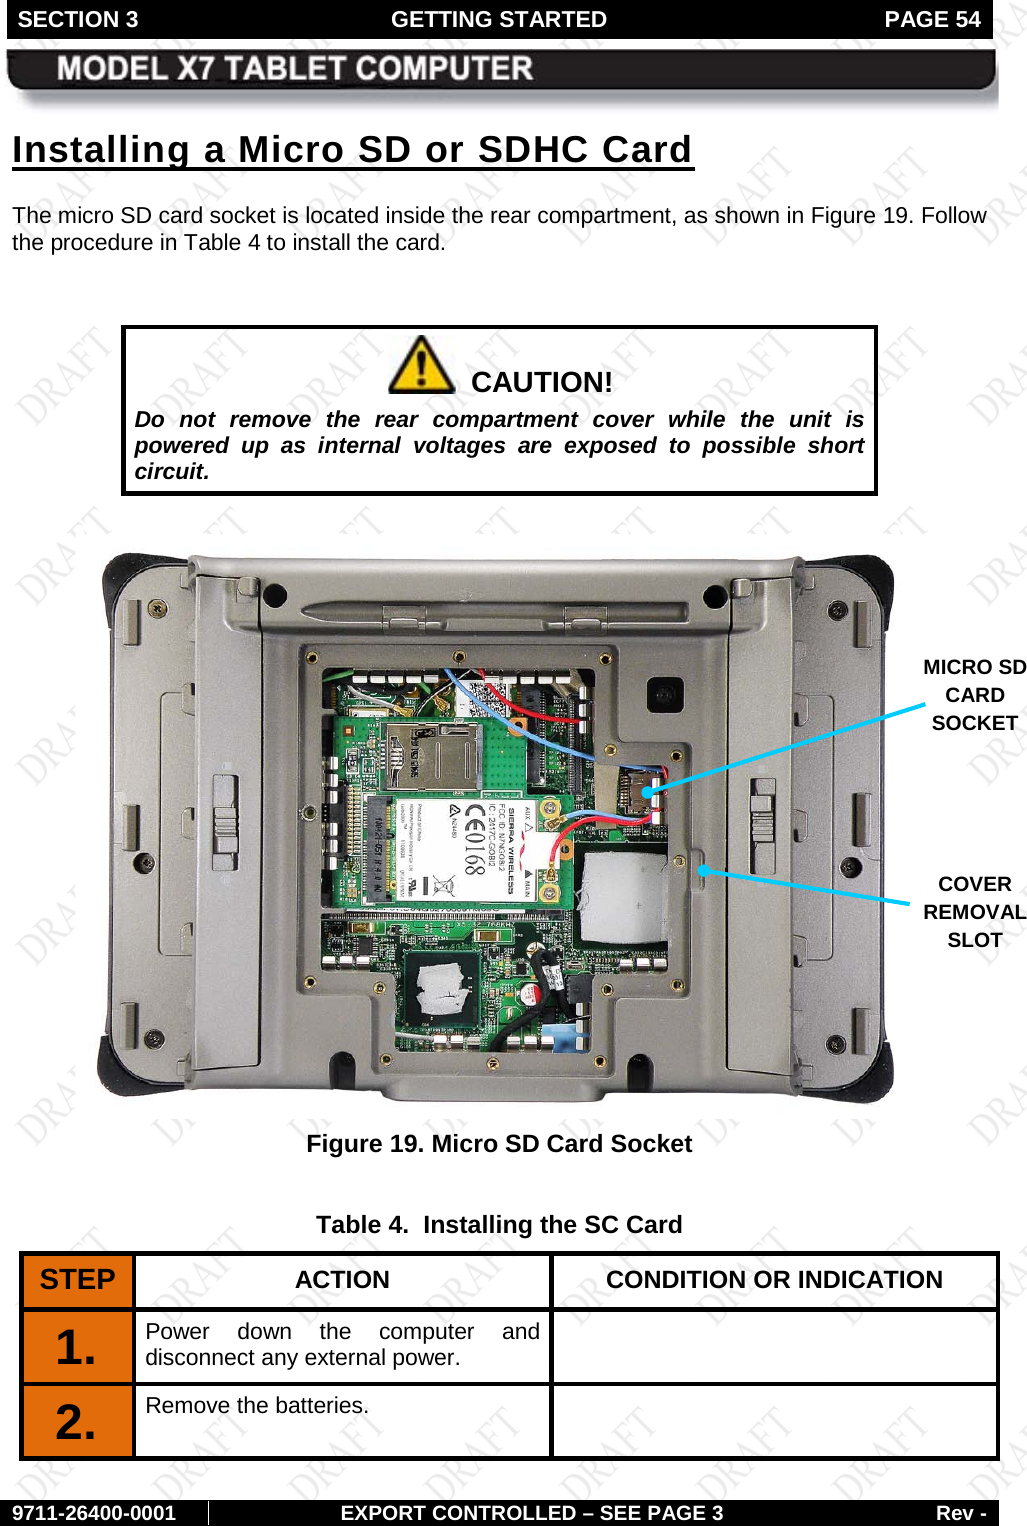 SECTION 3 GETTING STARTED  PAGE 54        9711-26400-0001 EXPORT CONTROLLED – SEE PAGE 3 Rev - Installing a Micro SD or SDHC Card The micro SD card socket is located inside the rear compartment, as shown in Figure 19. Follow the procedure in Table 4 to install the card.    CAUTION! Do not remove the rear compartment cover while the unit is powered up as internal voltages are exposed to possible short circuit.   Figure 19. Micro SD Card Socket  Table 4.  Installing the SC Card STEP  ACTION CONDITION OR INDICATION 1.  Power down the computer and disconnect any external power.  2.   Remove the batteries.   MICRO SD CARD SOCKET COVER REMOVAL SLOT 